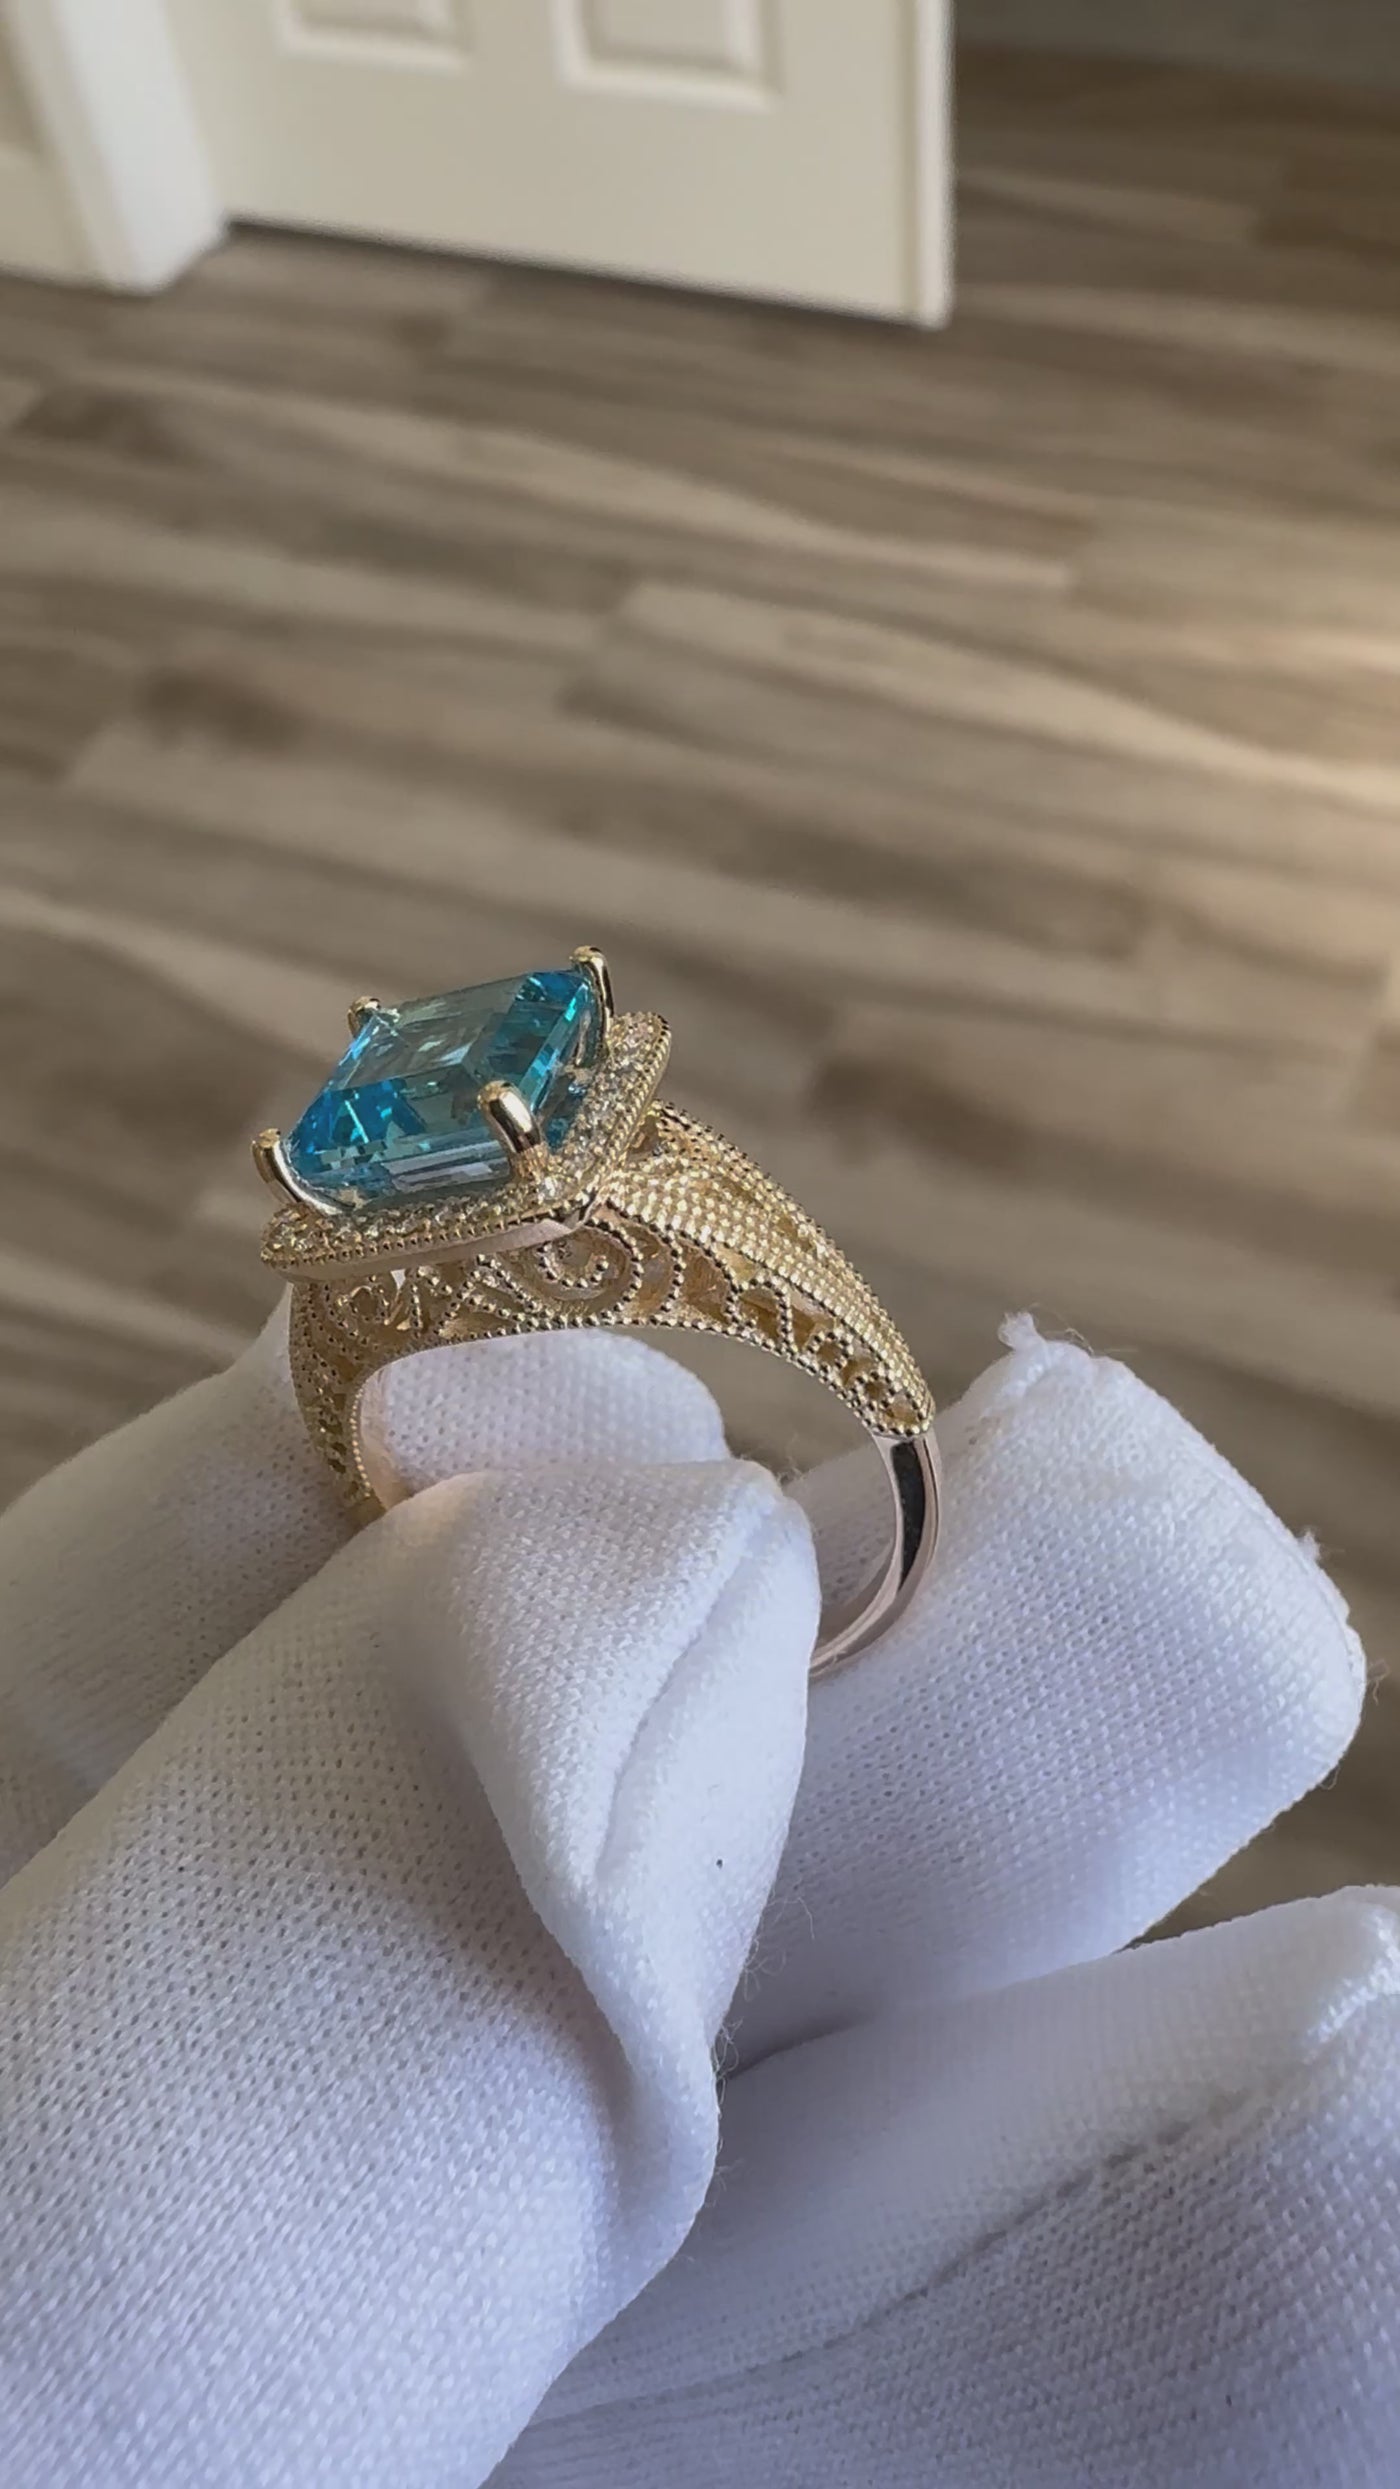 Natural Square Cut Blue Topaz 14k Solid Yellow Gold Exquisite Diamond Filigree Design Setting 3.6 Carat Total Weight